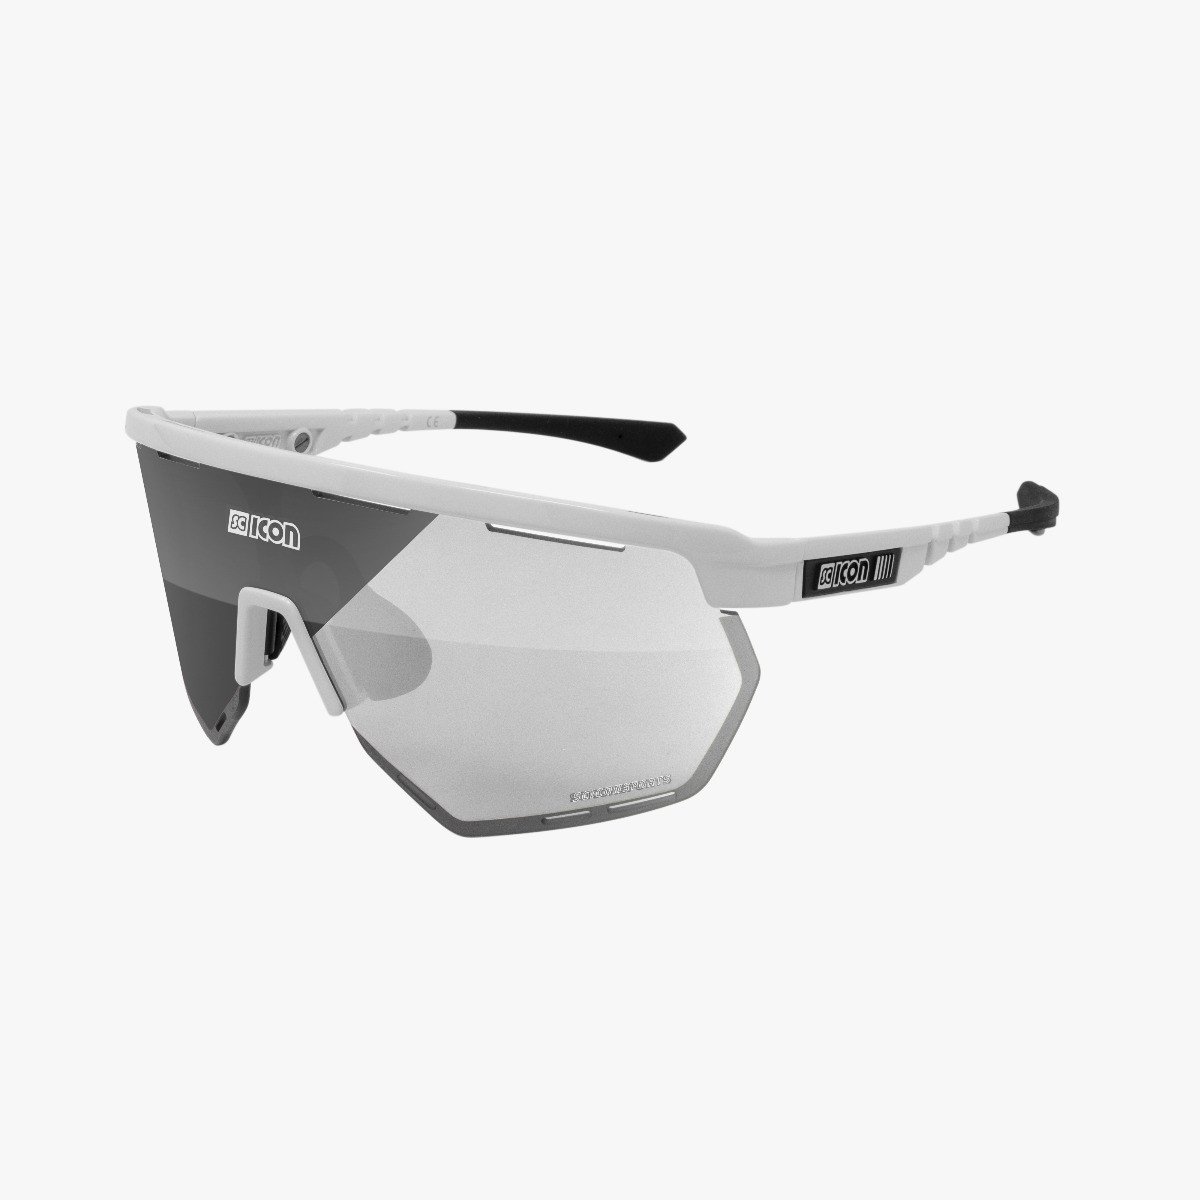 EY26010802-aerowing-white-gloss-frame-photocromic-silver-lens